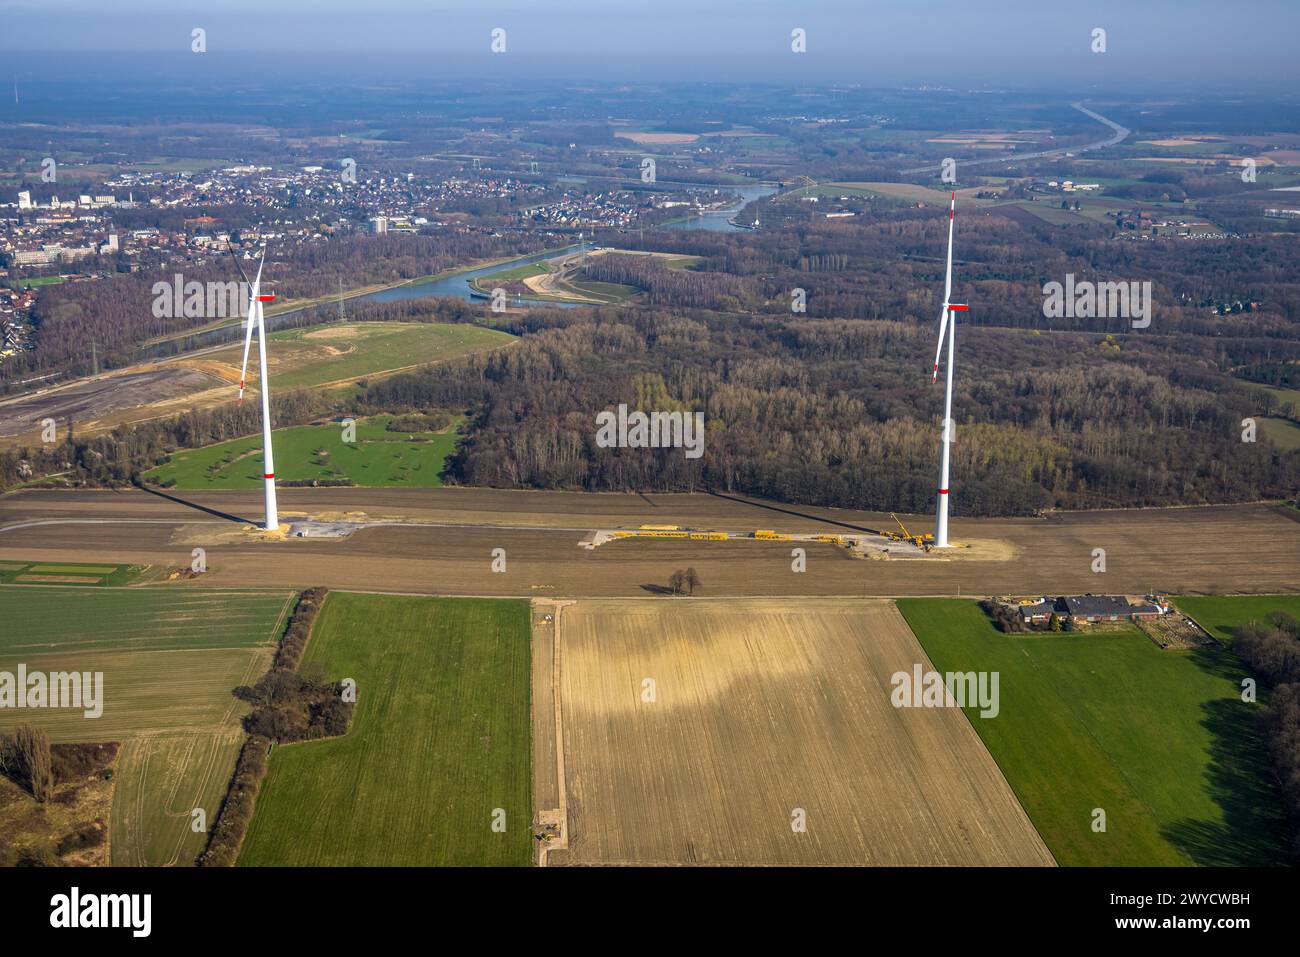 Aerial view, wind turbines construction, farming community Im Löringhof next to the Datteln 4 power plant, Dortmund-Ems canal and forest area with dis Stock Photo